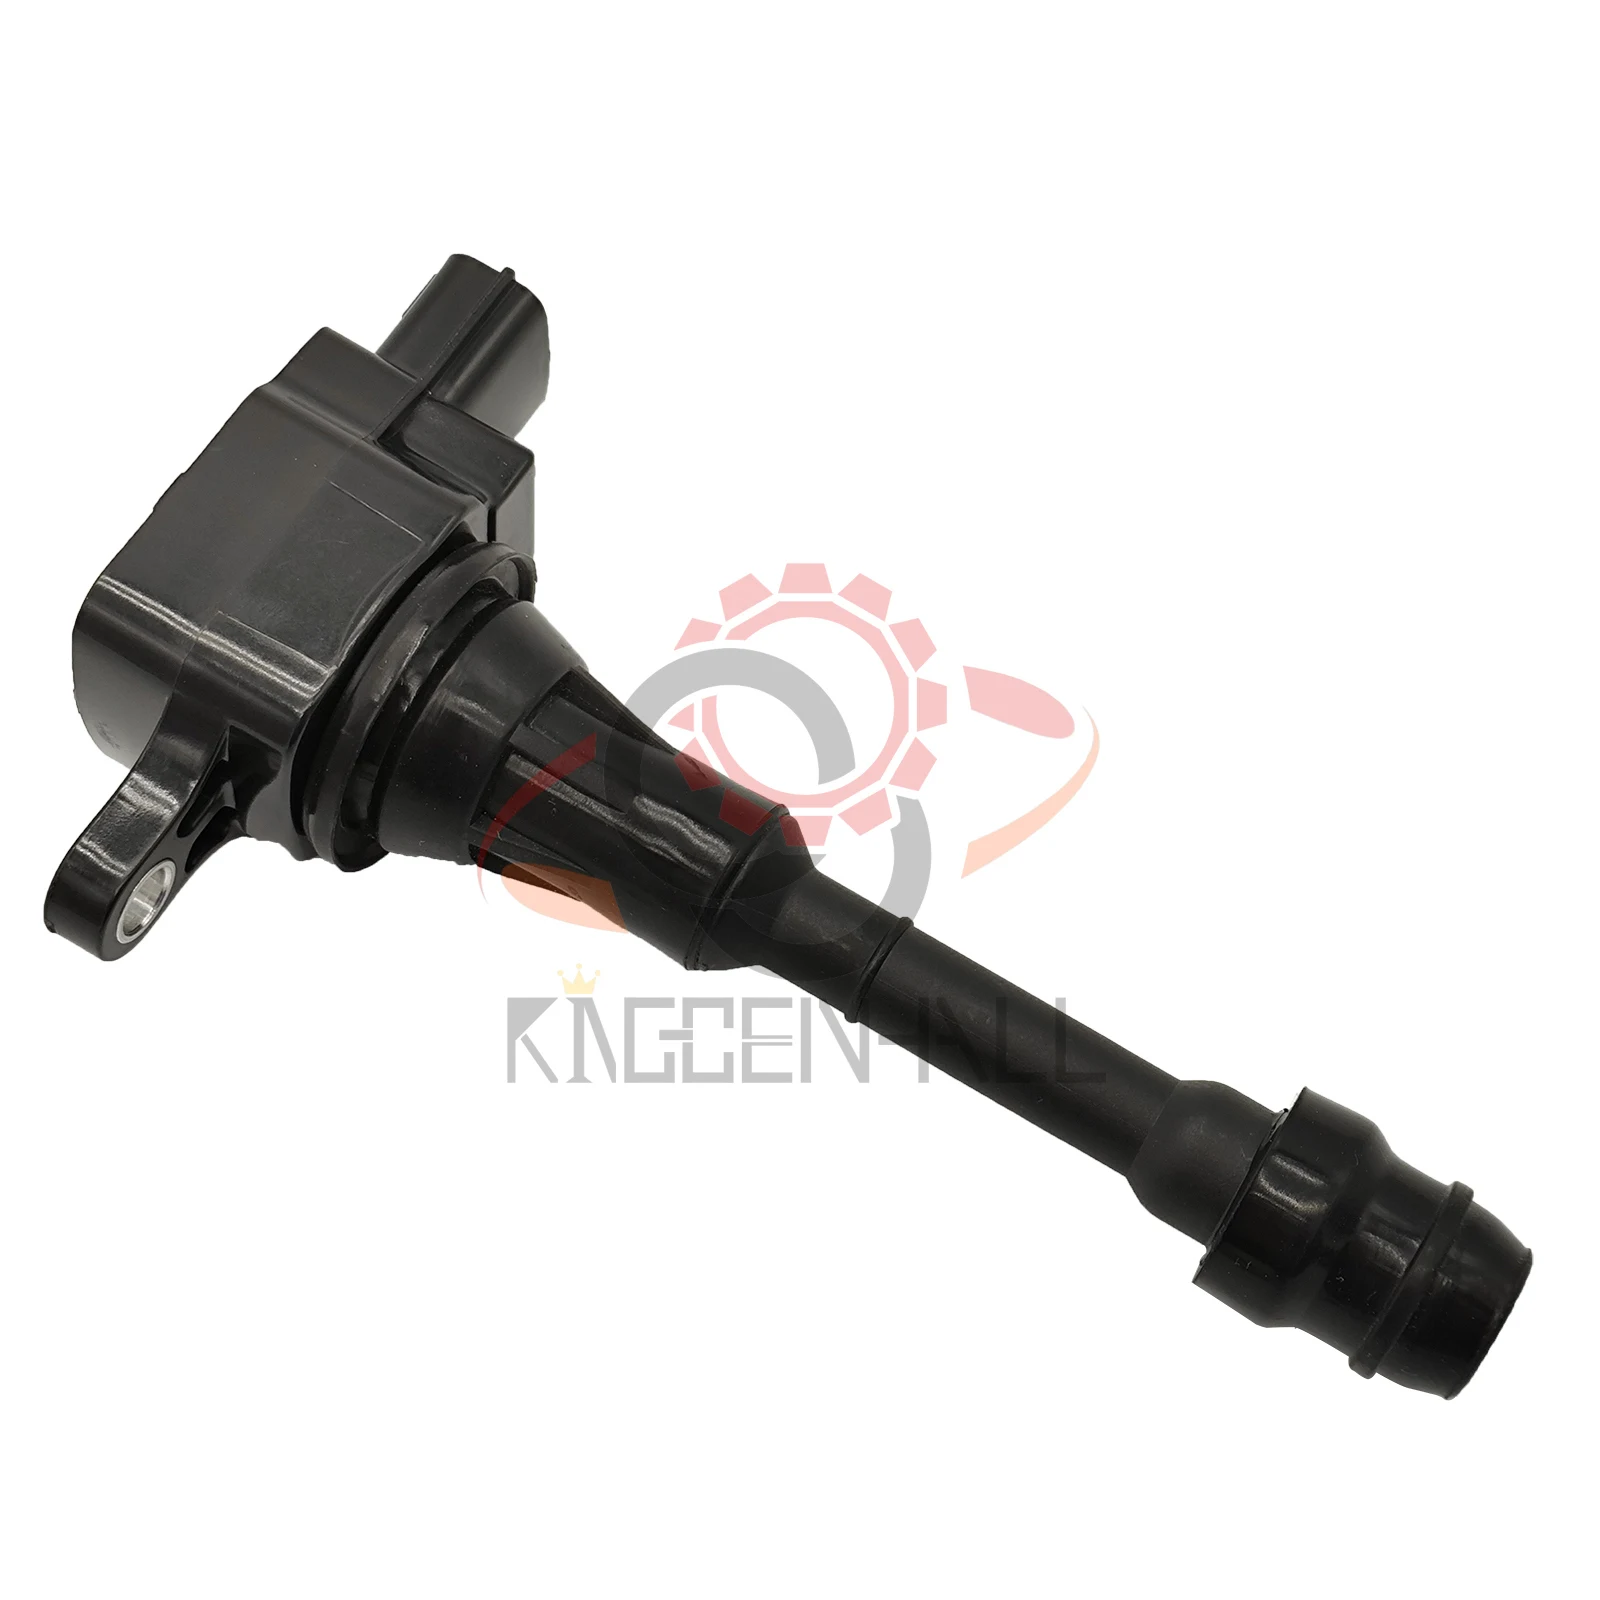 

For NISSAN X-TRAIL 200211-201301 22448-8H300 Ignition Coil 224488H300 2503907 224488H310 224489Y600